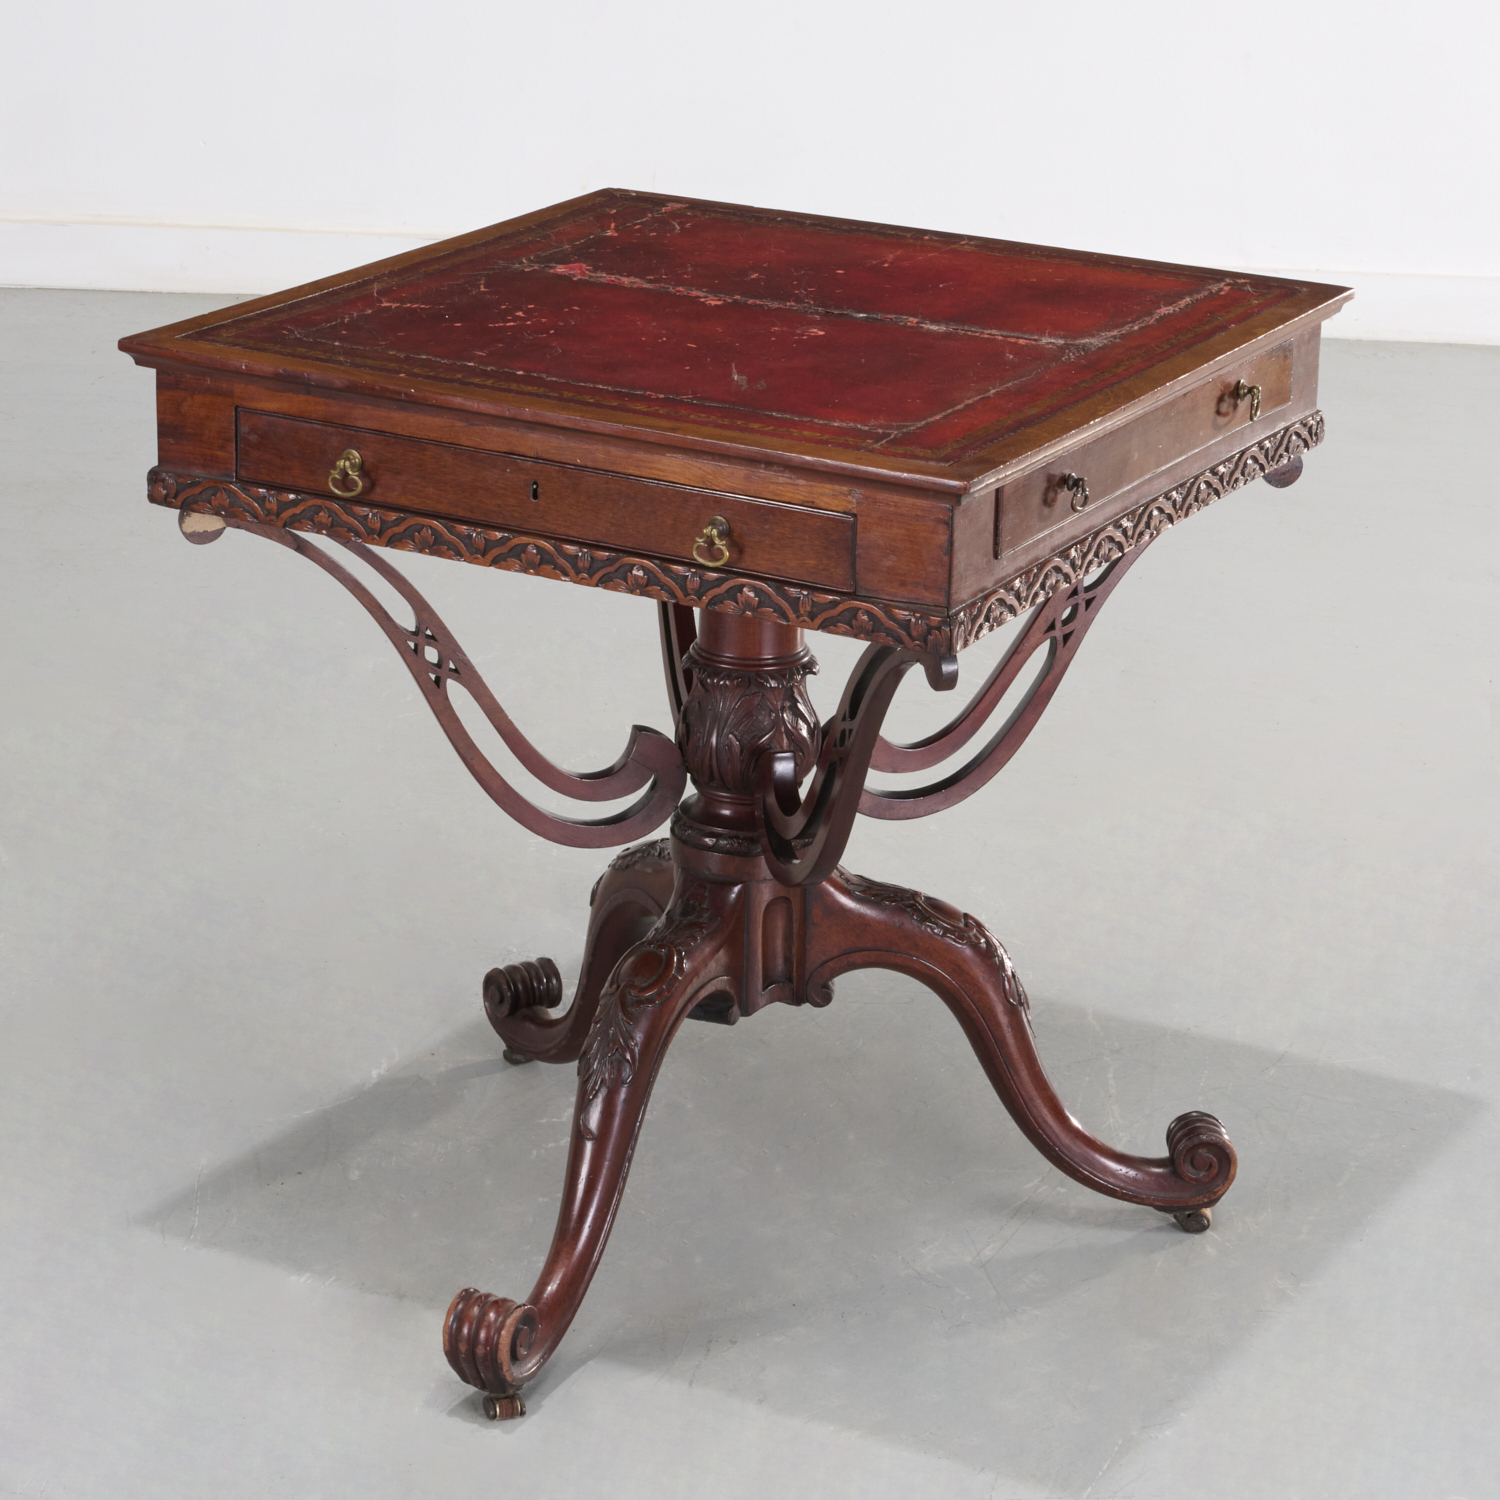 WILLIAM FRANCE (ATTR) READING TABLE,